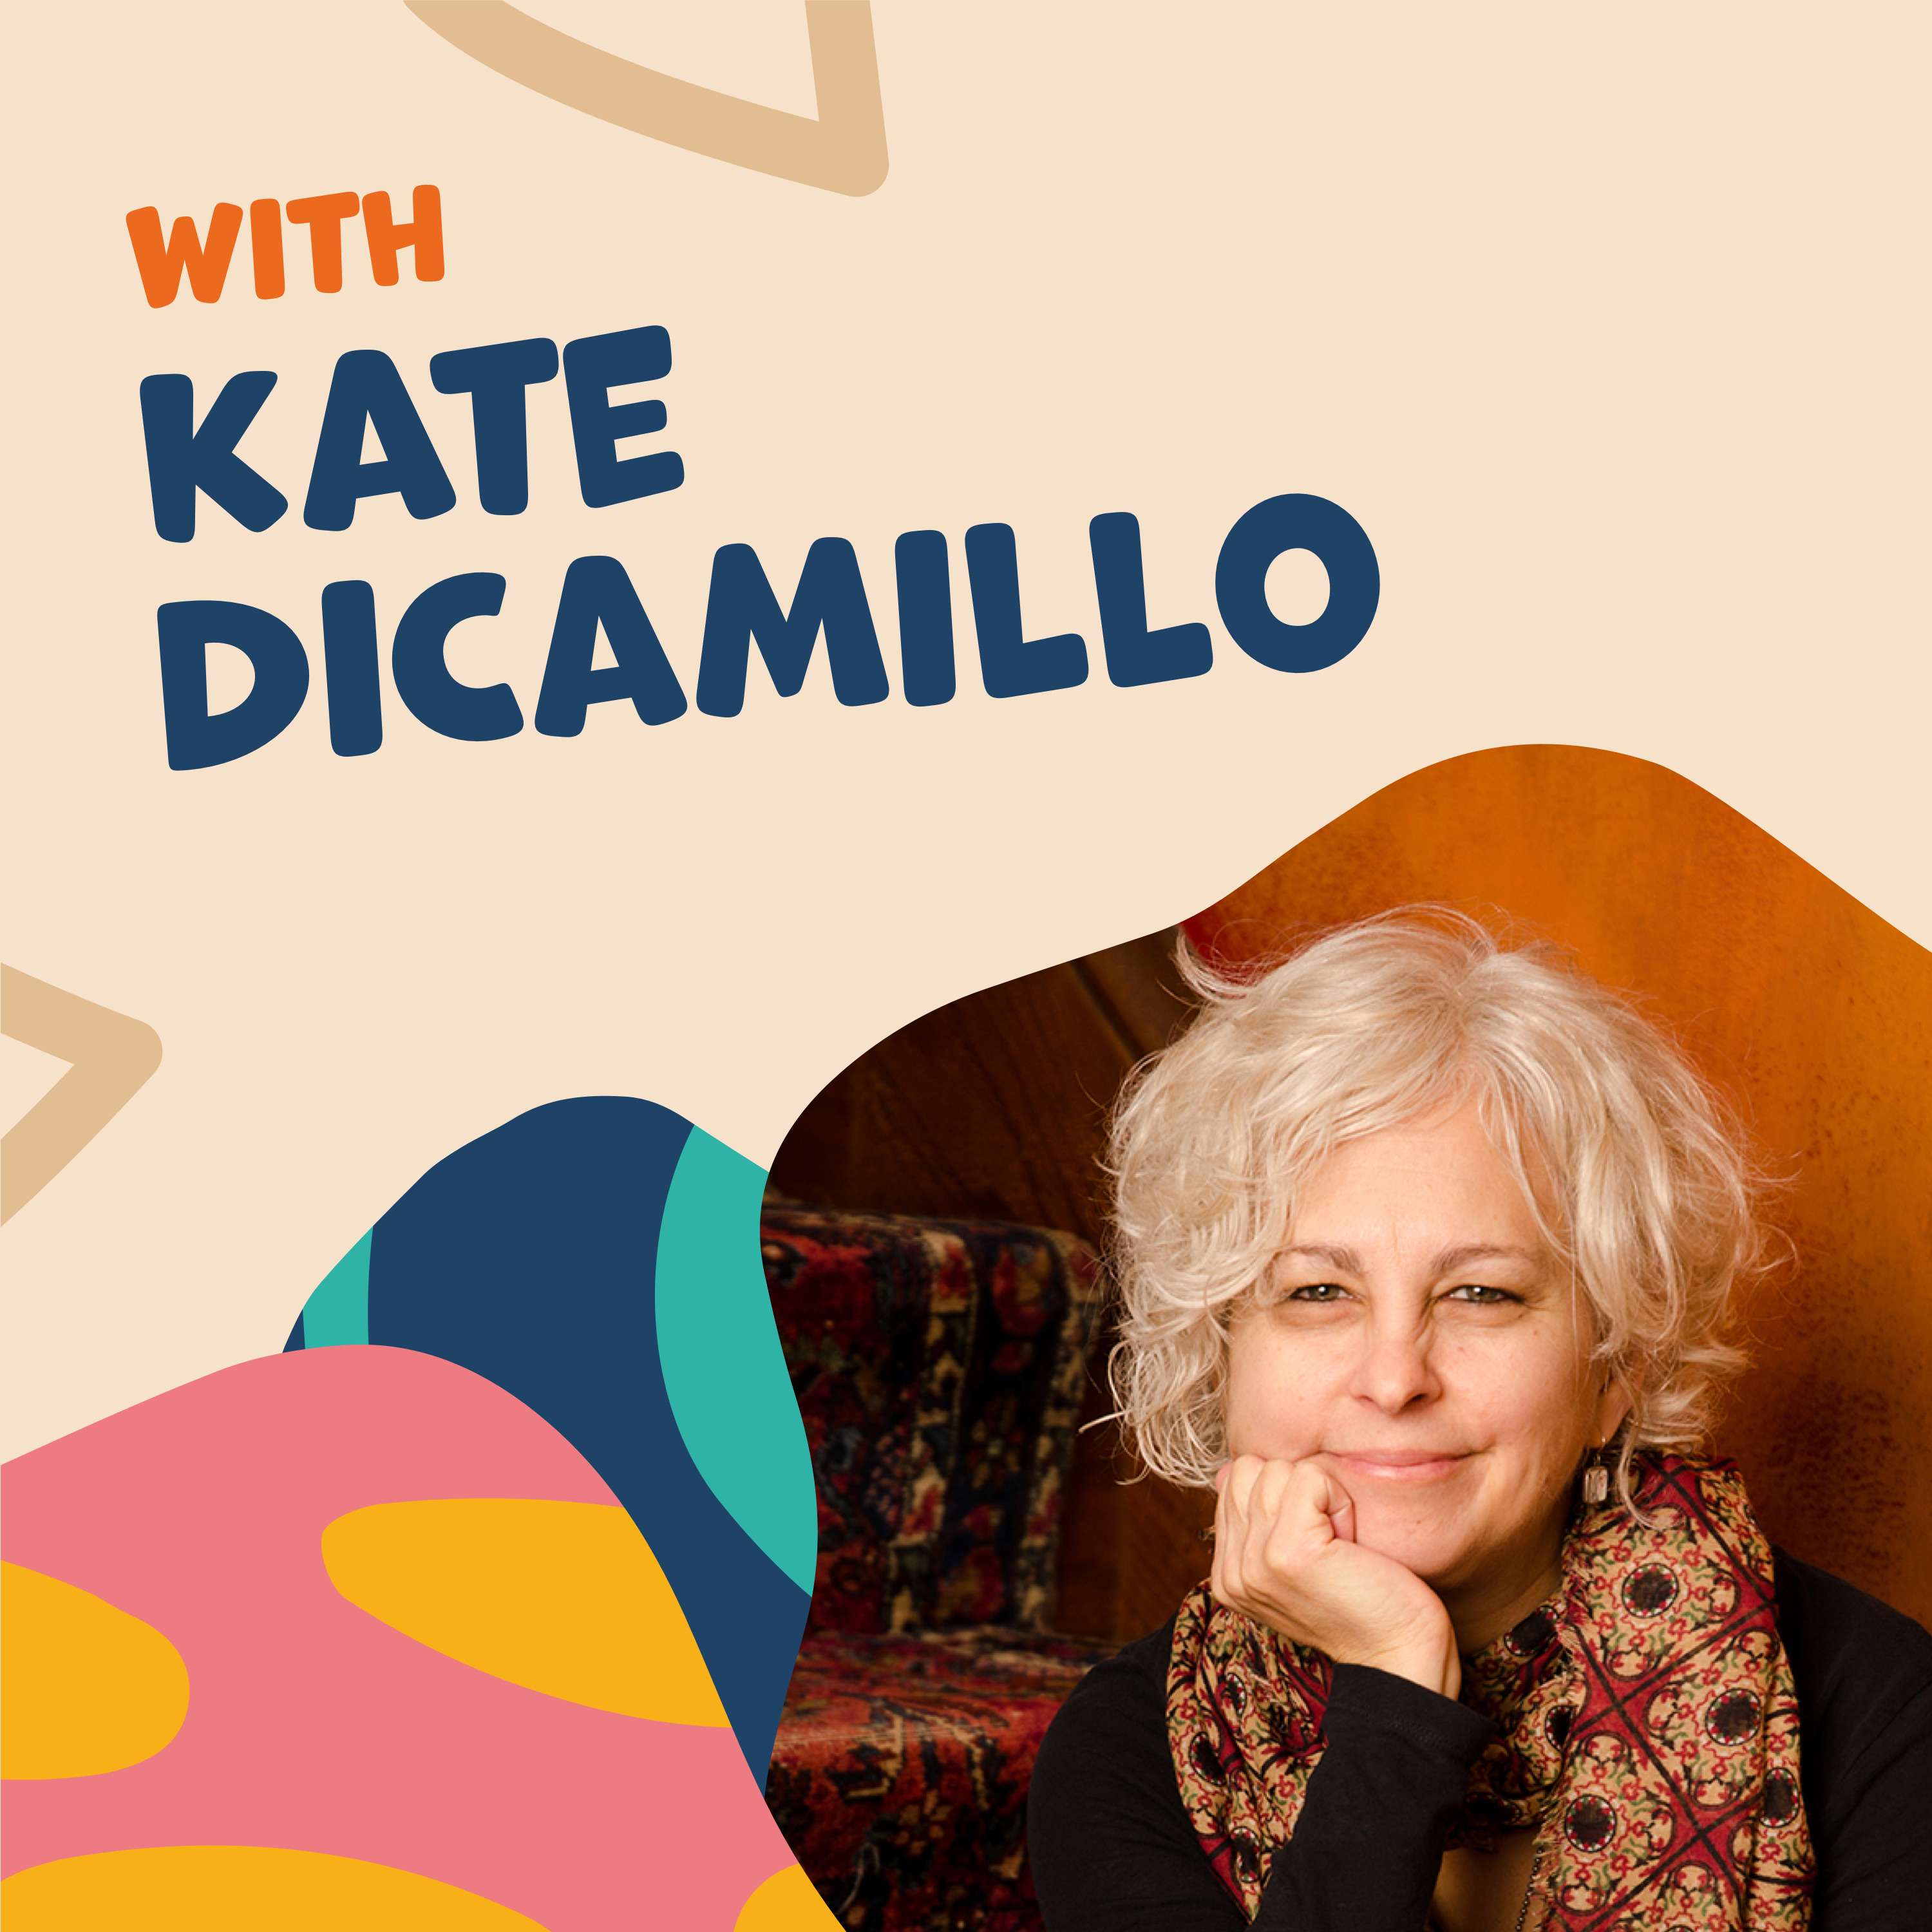 They Already Know: Kate DiCamillo on Helping Kids Find Hope in Darkness